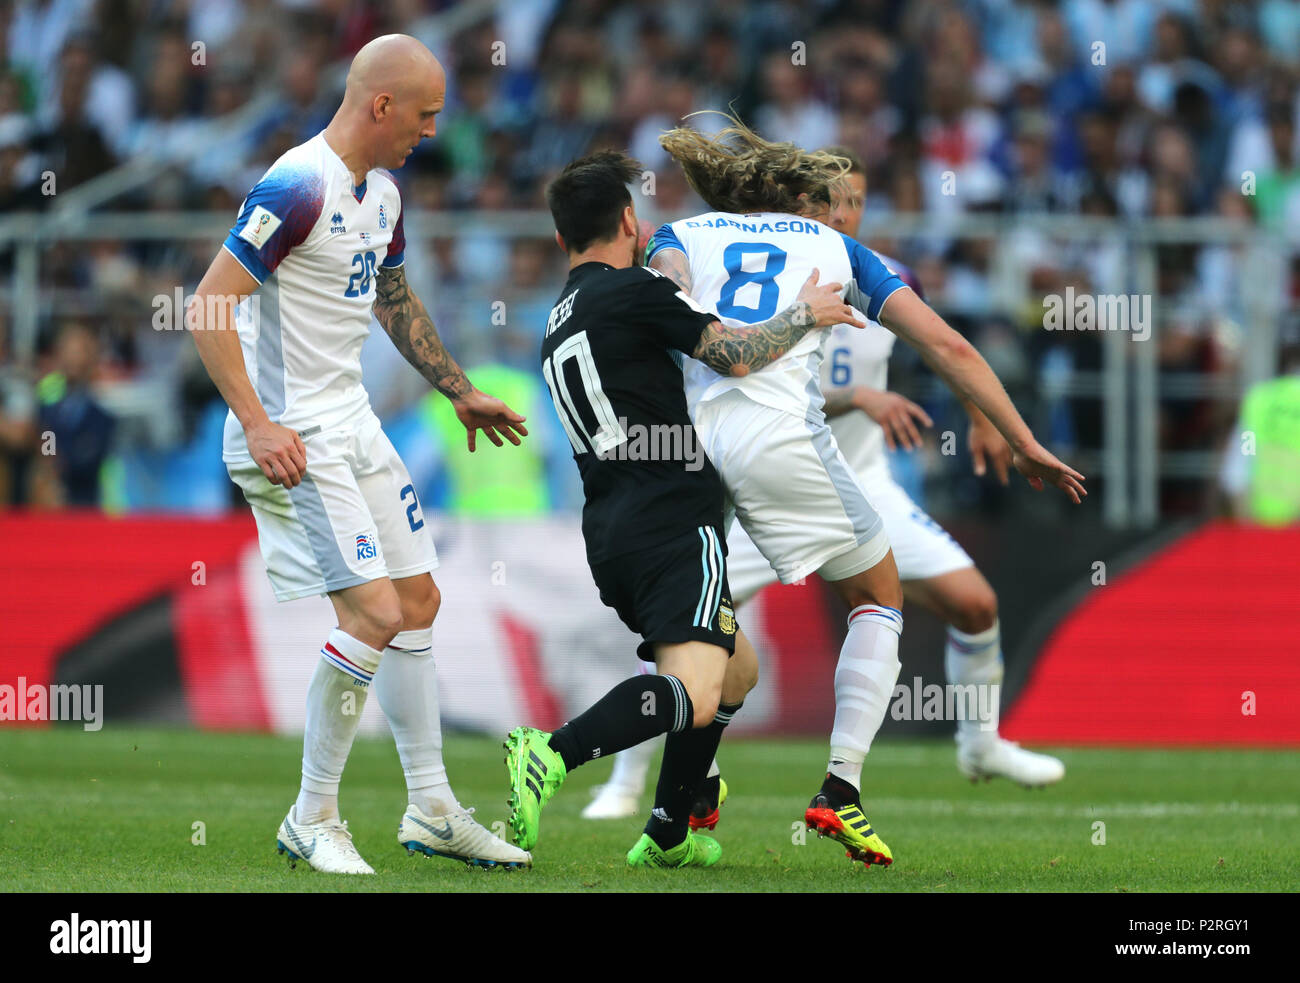 Birkir Bjarnason & Lionel Messi  ARGENTINA V ICELAND  ARGENTINA V ICELAND , 2018 FIFA WORLD CUP RUSSIA  16 June 2018  GBC8151  2018 FIFA World Cup Russia Spartak Stadium Moscow    STRICTLY EDITORIAL USE ONLY.   If The Player/Players Depicted In This Image Is/Are Playing For An English Club Or The England National Team.   Then This Image May Only Be Used For Editorial Purposes. No Commercial Use.    The Following Usages Are Also Restricted EVEN IF IN AN EDITORIAL CONTEXT:   Use in conjuction with, or part of, any unauthorized audio, video, data, fixture lists, club/league logos, Betting, Games  Stock Photo